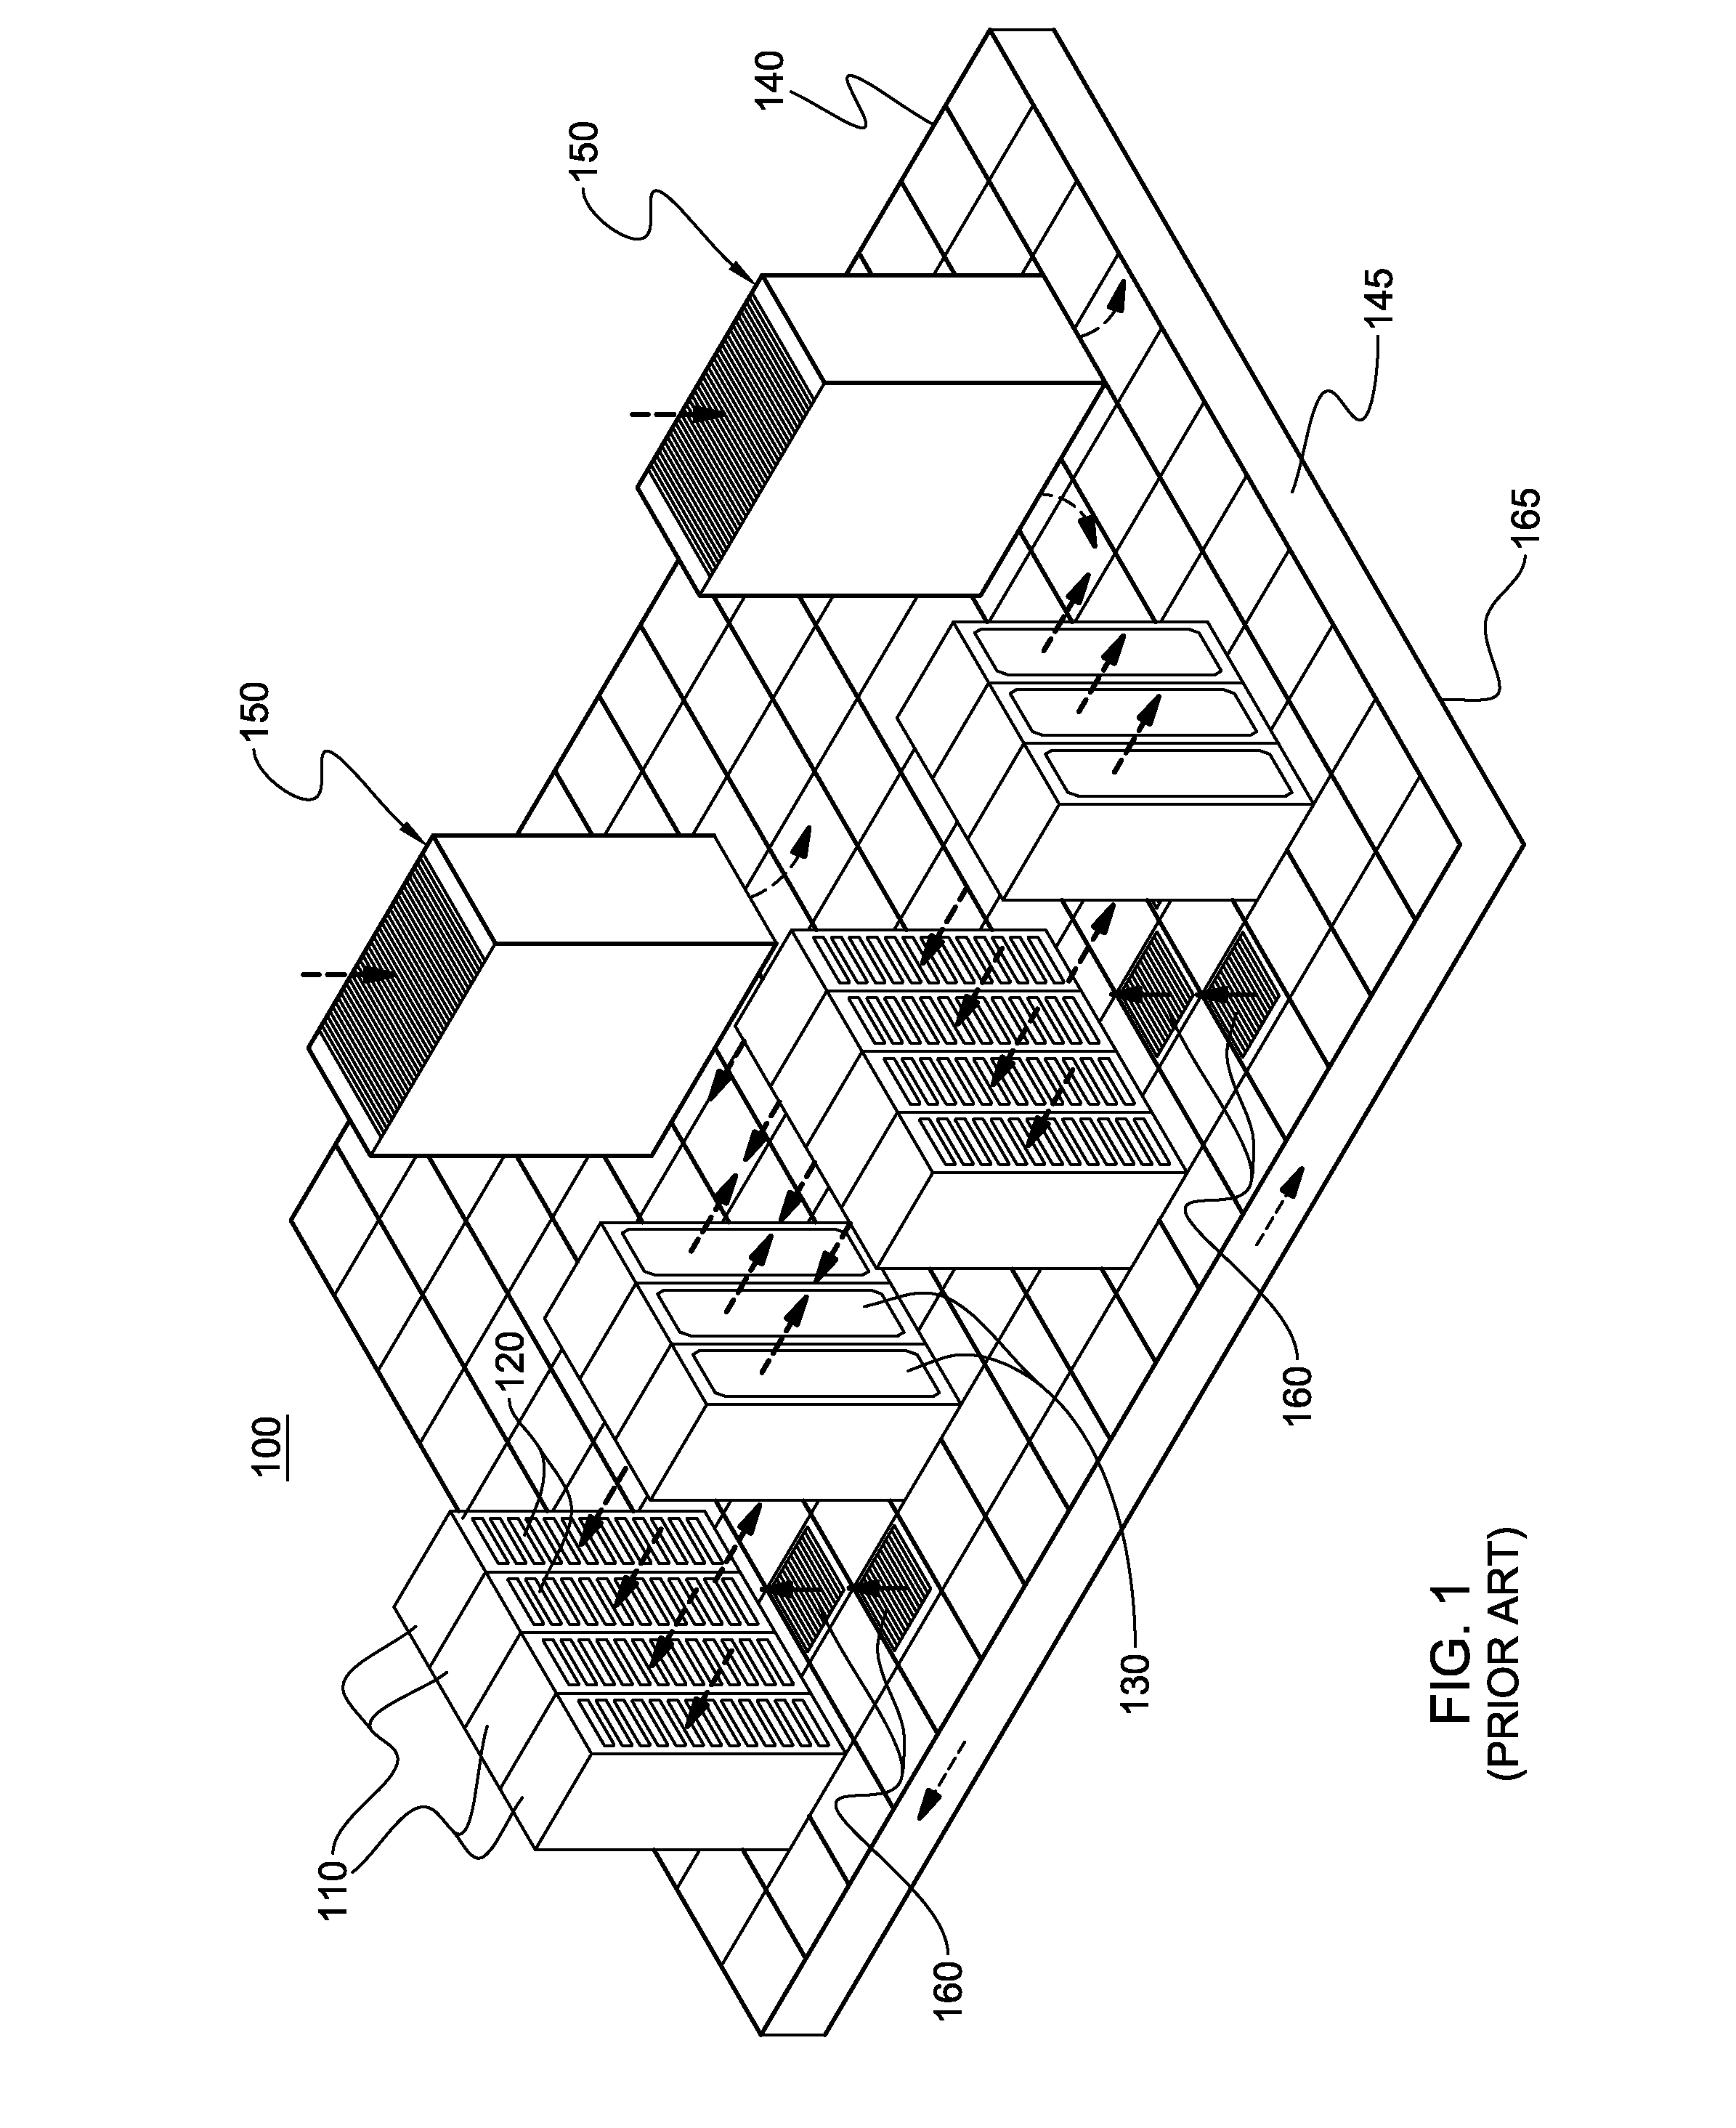 Vapor-compression refrigeration apparatus with refrgierant bypass and controlled heat load